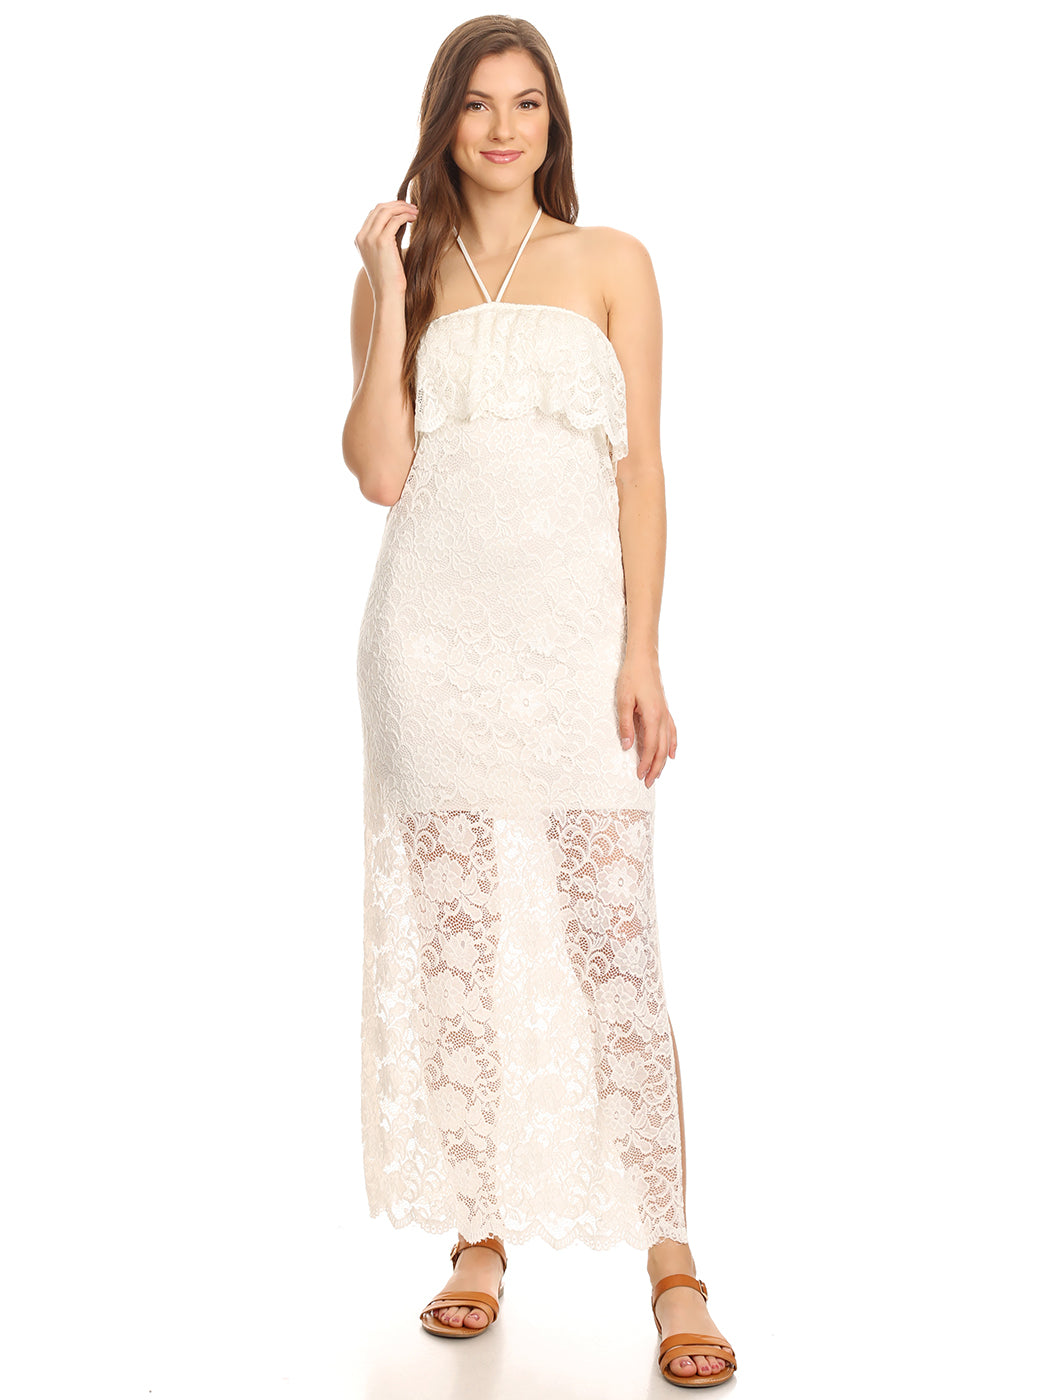 Womens White Lace Convertible Halter Strapless Maxi Dress Cover Up